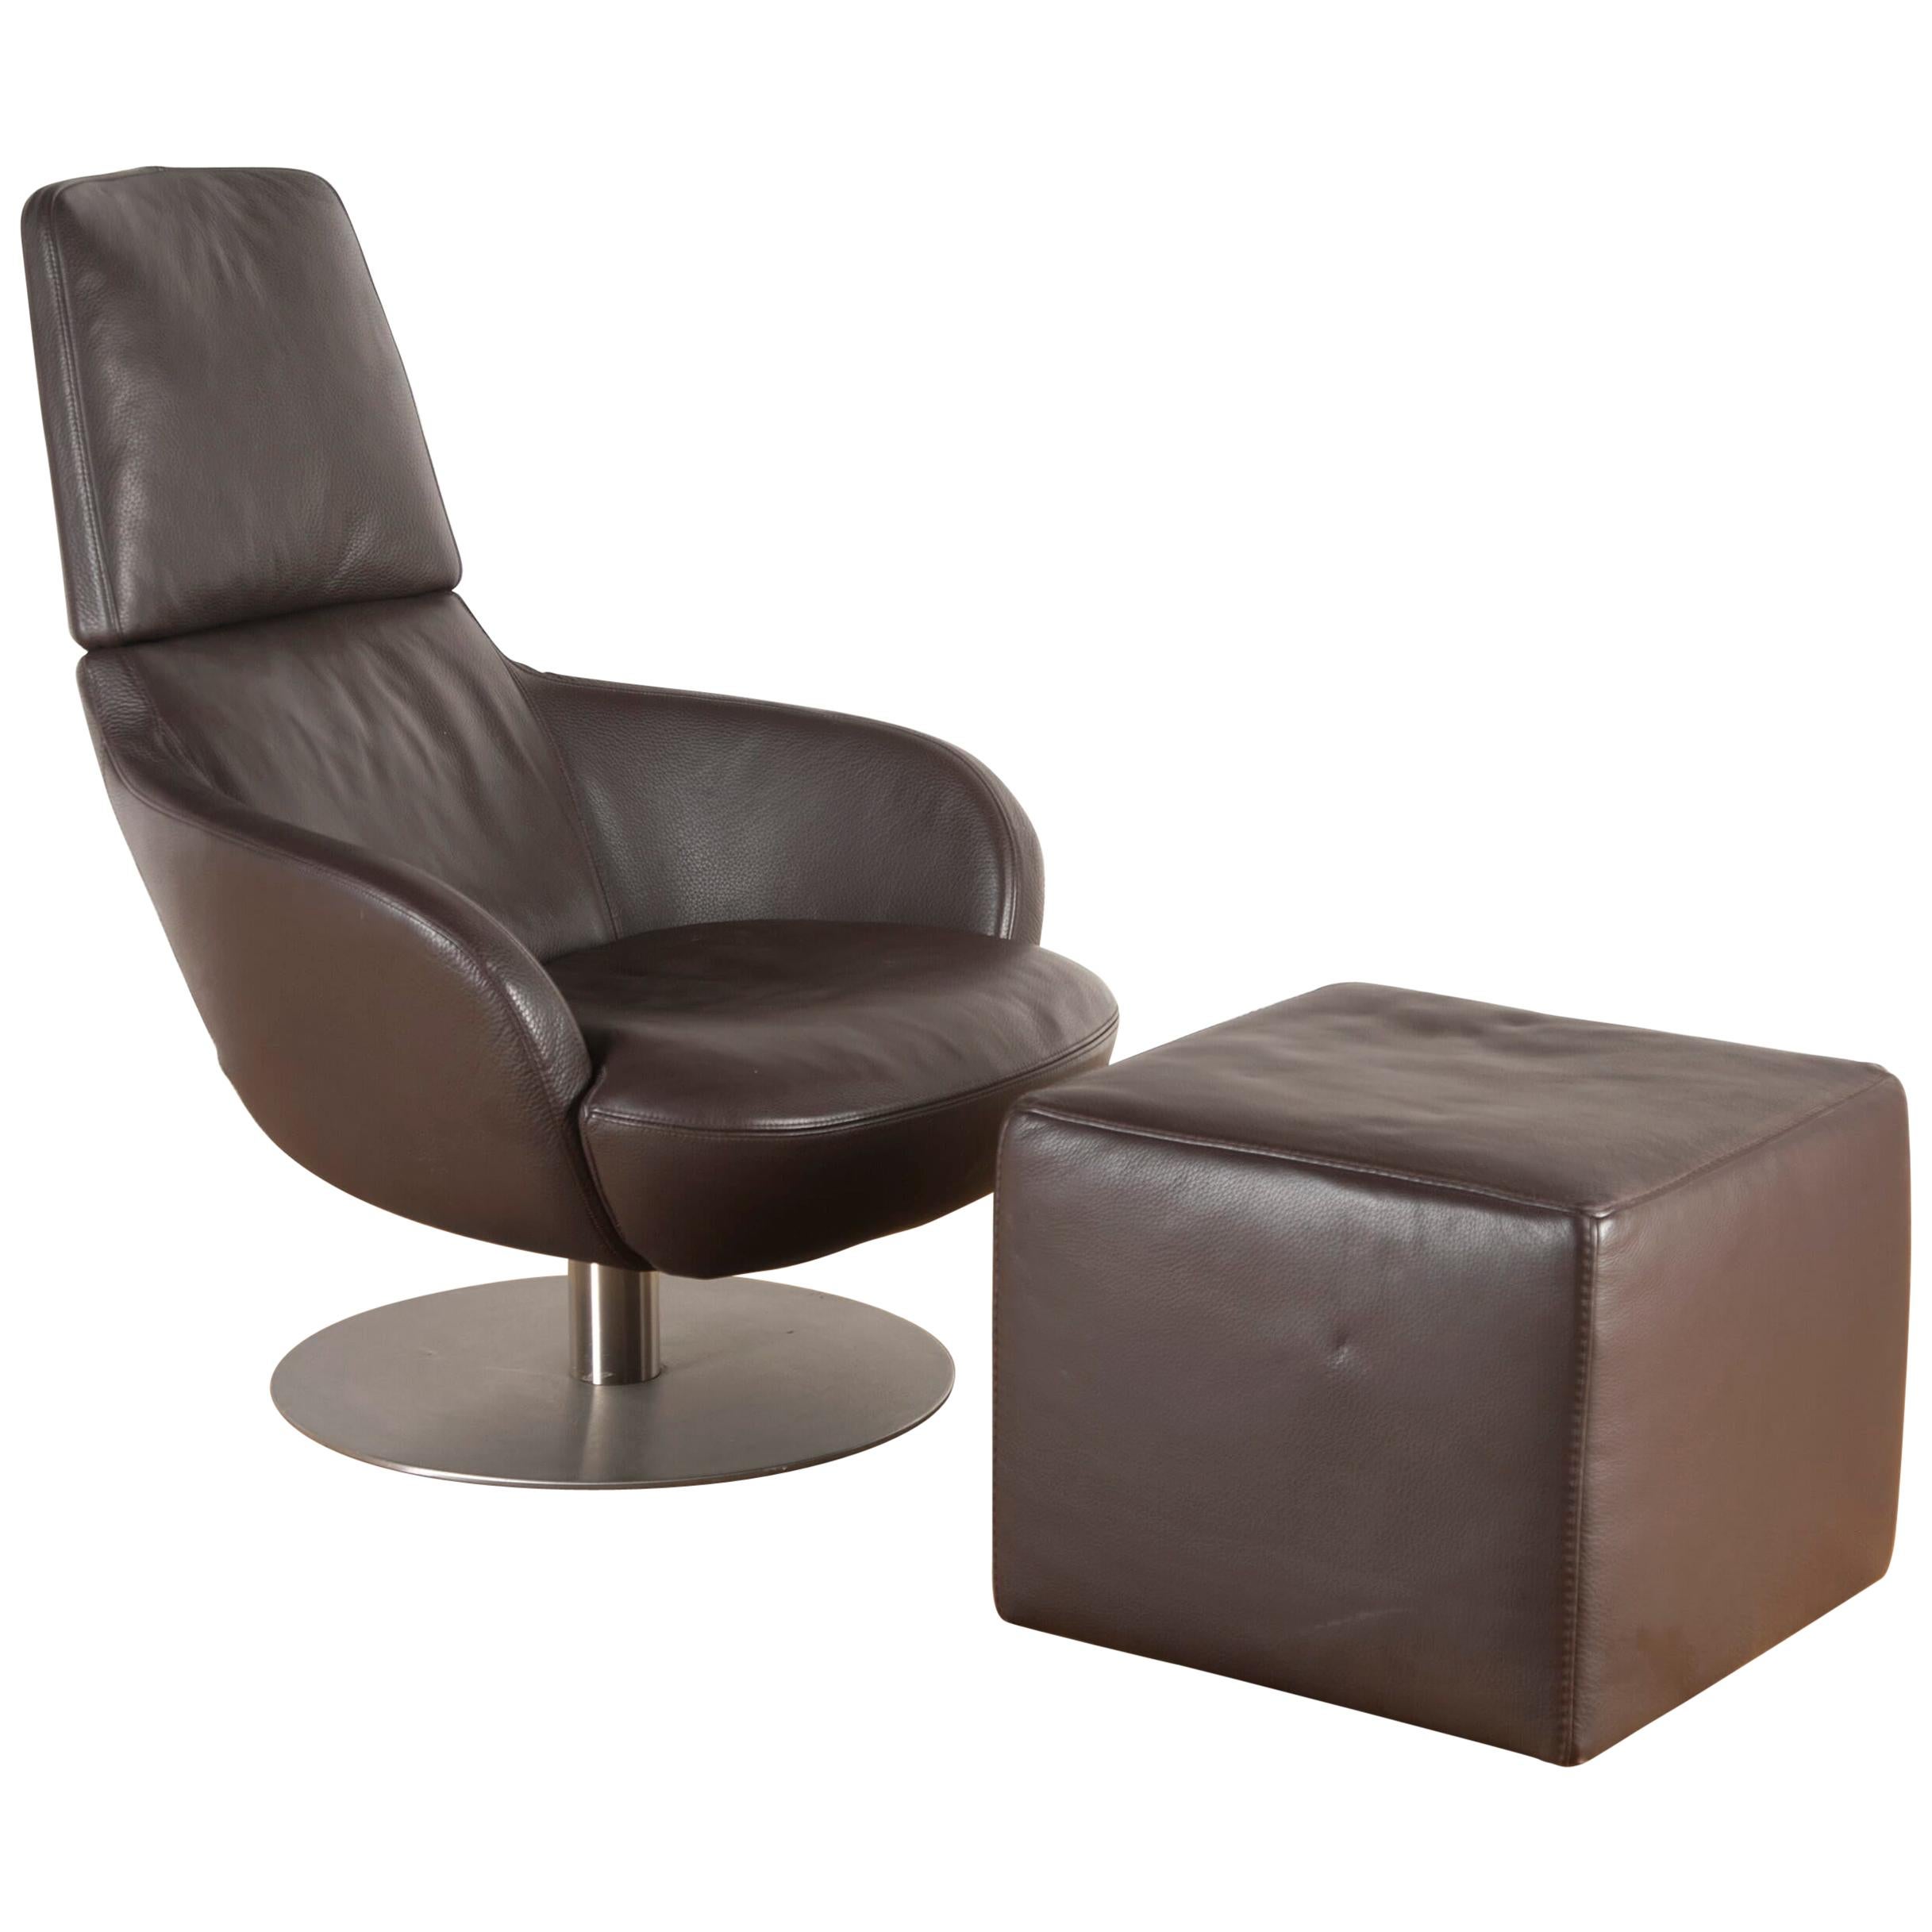 'Brend' Italian Leather Armchair and Footstool by Natuzzi Italia